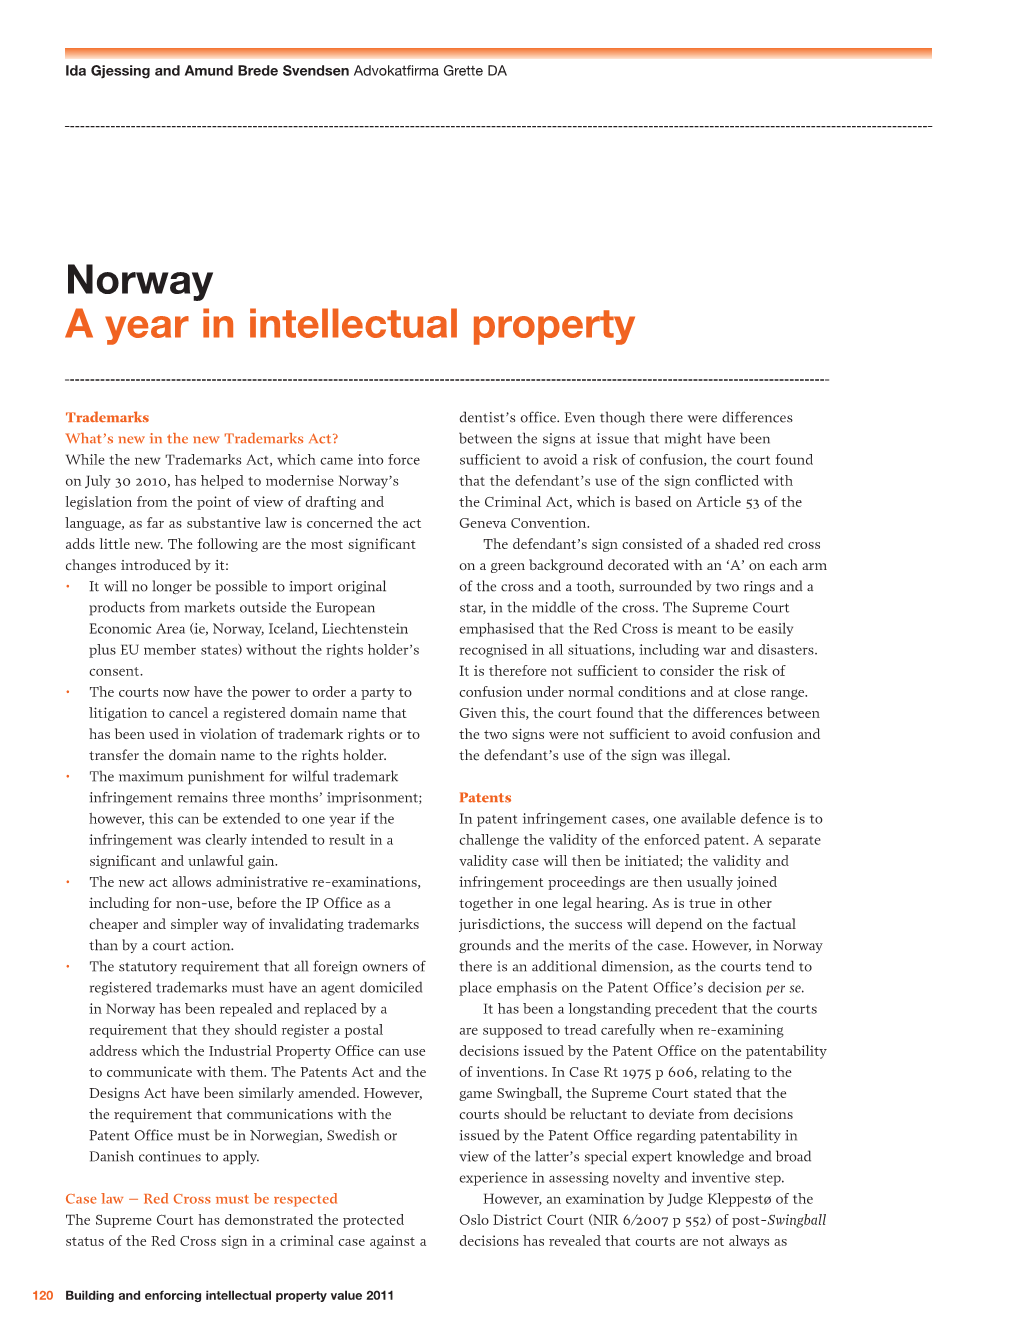 Norway a Year in Intellectual Property